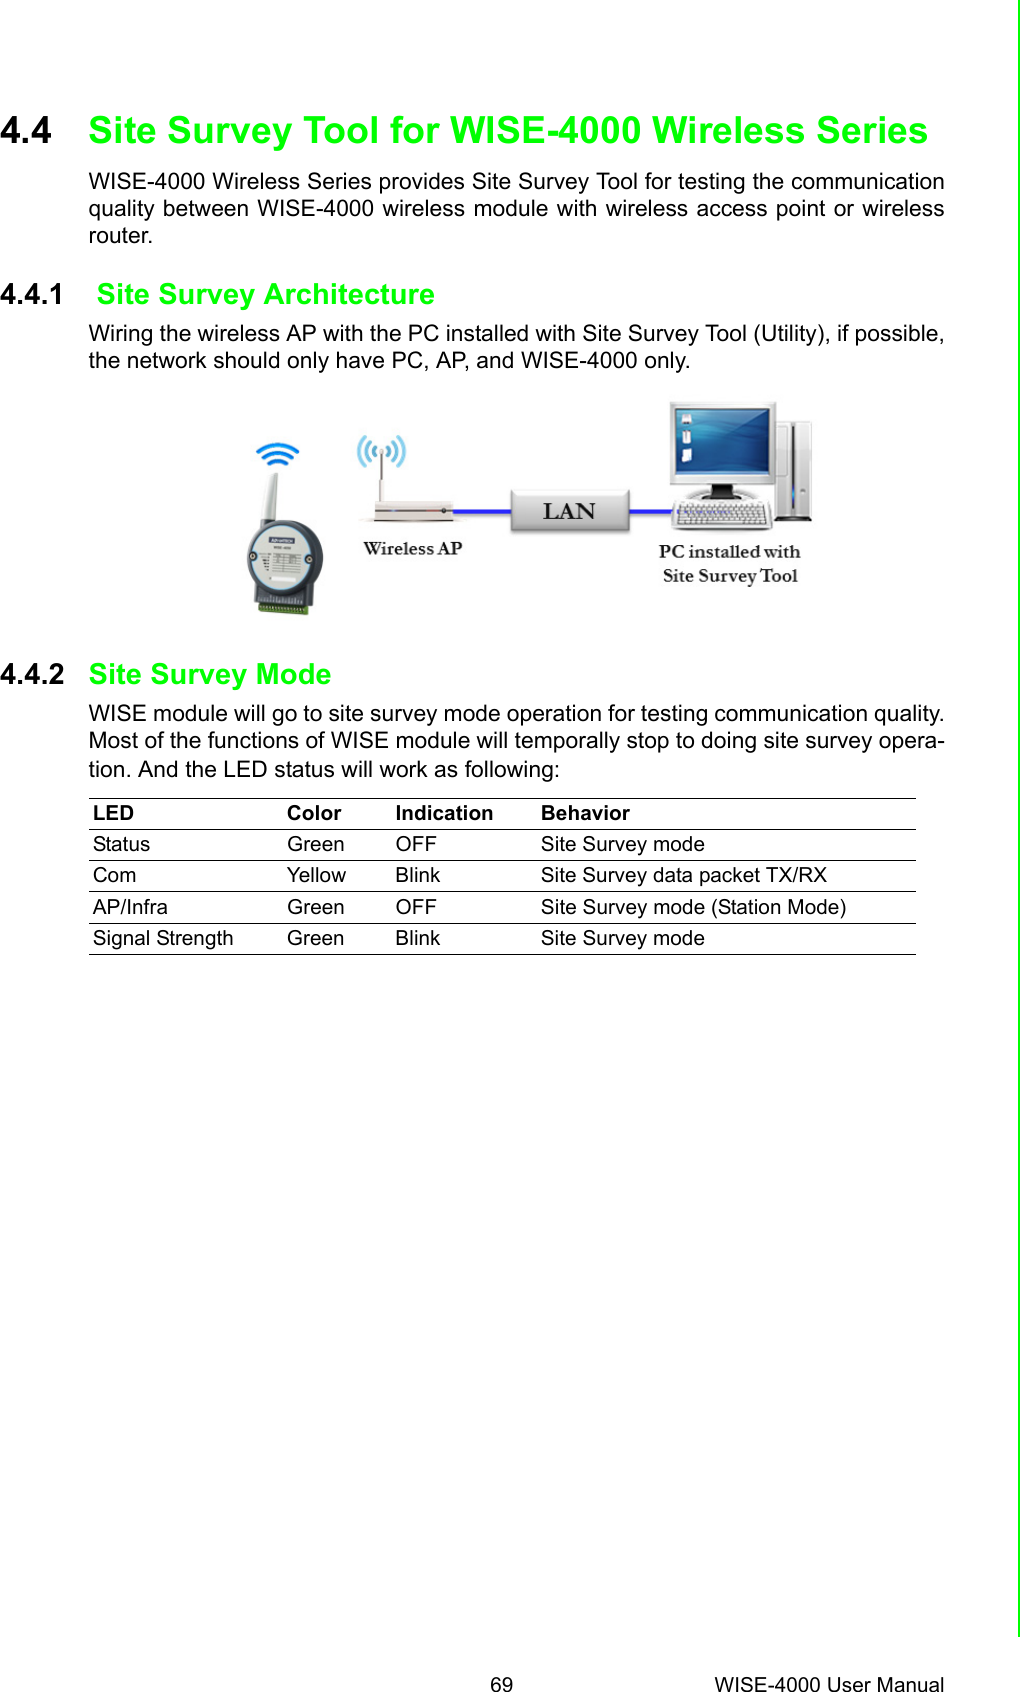 69 WISE-4000 User ManualChapter 4 System Configuration4.4 Site Survey Tool for WISE-4000 Wireless SeriesWISE-4000 Wireless Series provides Site Survey Tool for testing the communicationquality between WISE-4000 wireless module with wireless access point or wirelessrouter.4.4.1  Site Survey ArchitectureWiring the wireless AP with the PC installed with Site Survey Tool (Utility), if possible,the network should only have PC, AP, and WISE-4000 only.4.4.2 Site Survey ModeWISE module will go to site survey mode operation for testing communication quality.Most of the functions of WISE module will temporally stop to doing site survey opera-tion. And the LED status will work as following:LED Color Indication BehaviorStatus Green OFF Site Survey modeCom Yellow Blink Site Survey data packet TX/RXAP/Infra Green OFF Site Survey mode (Station Mode)Signal Strength Green Blink Site Survey mode